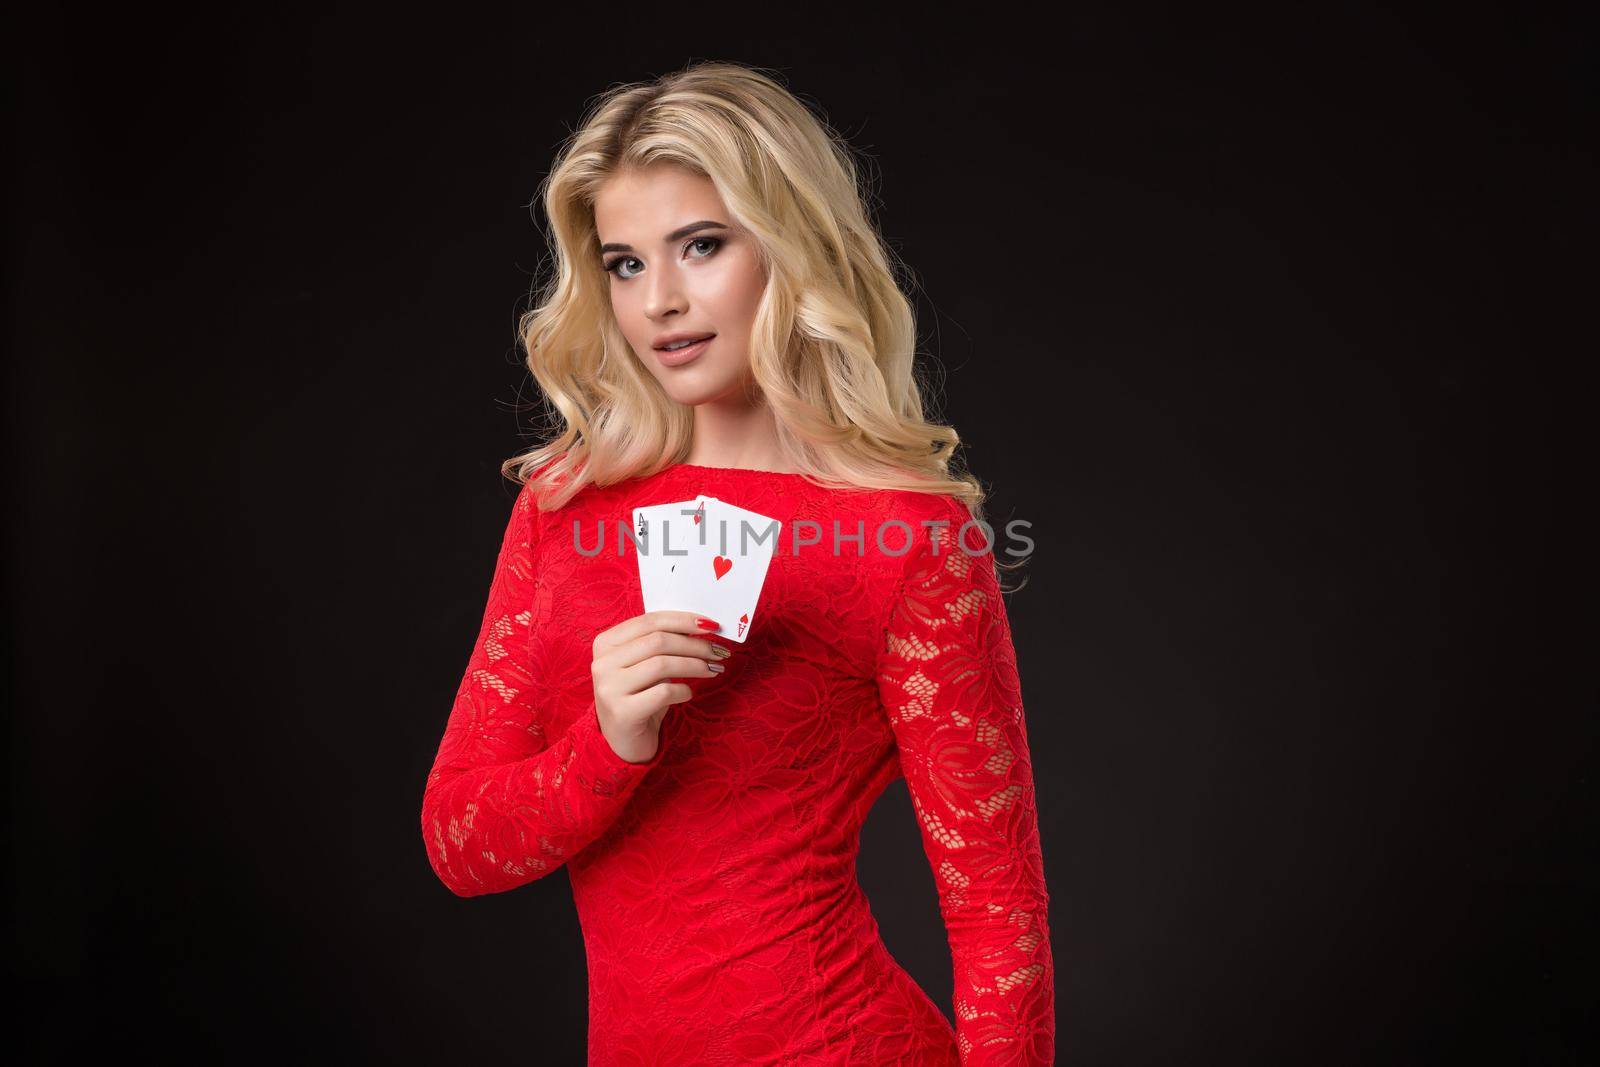 Young beautiful blond woman in a red dress with playing cards over black. Poker